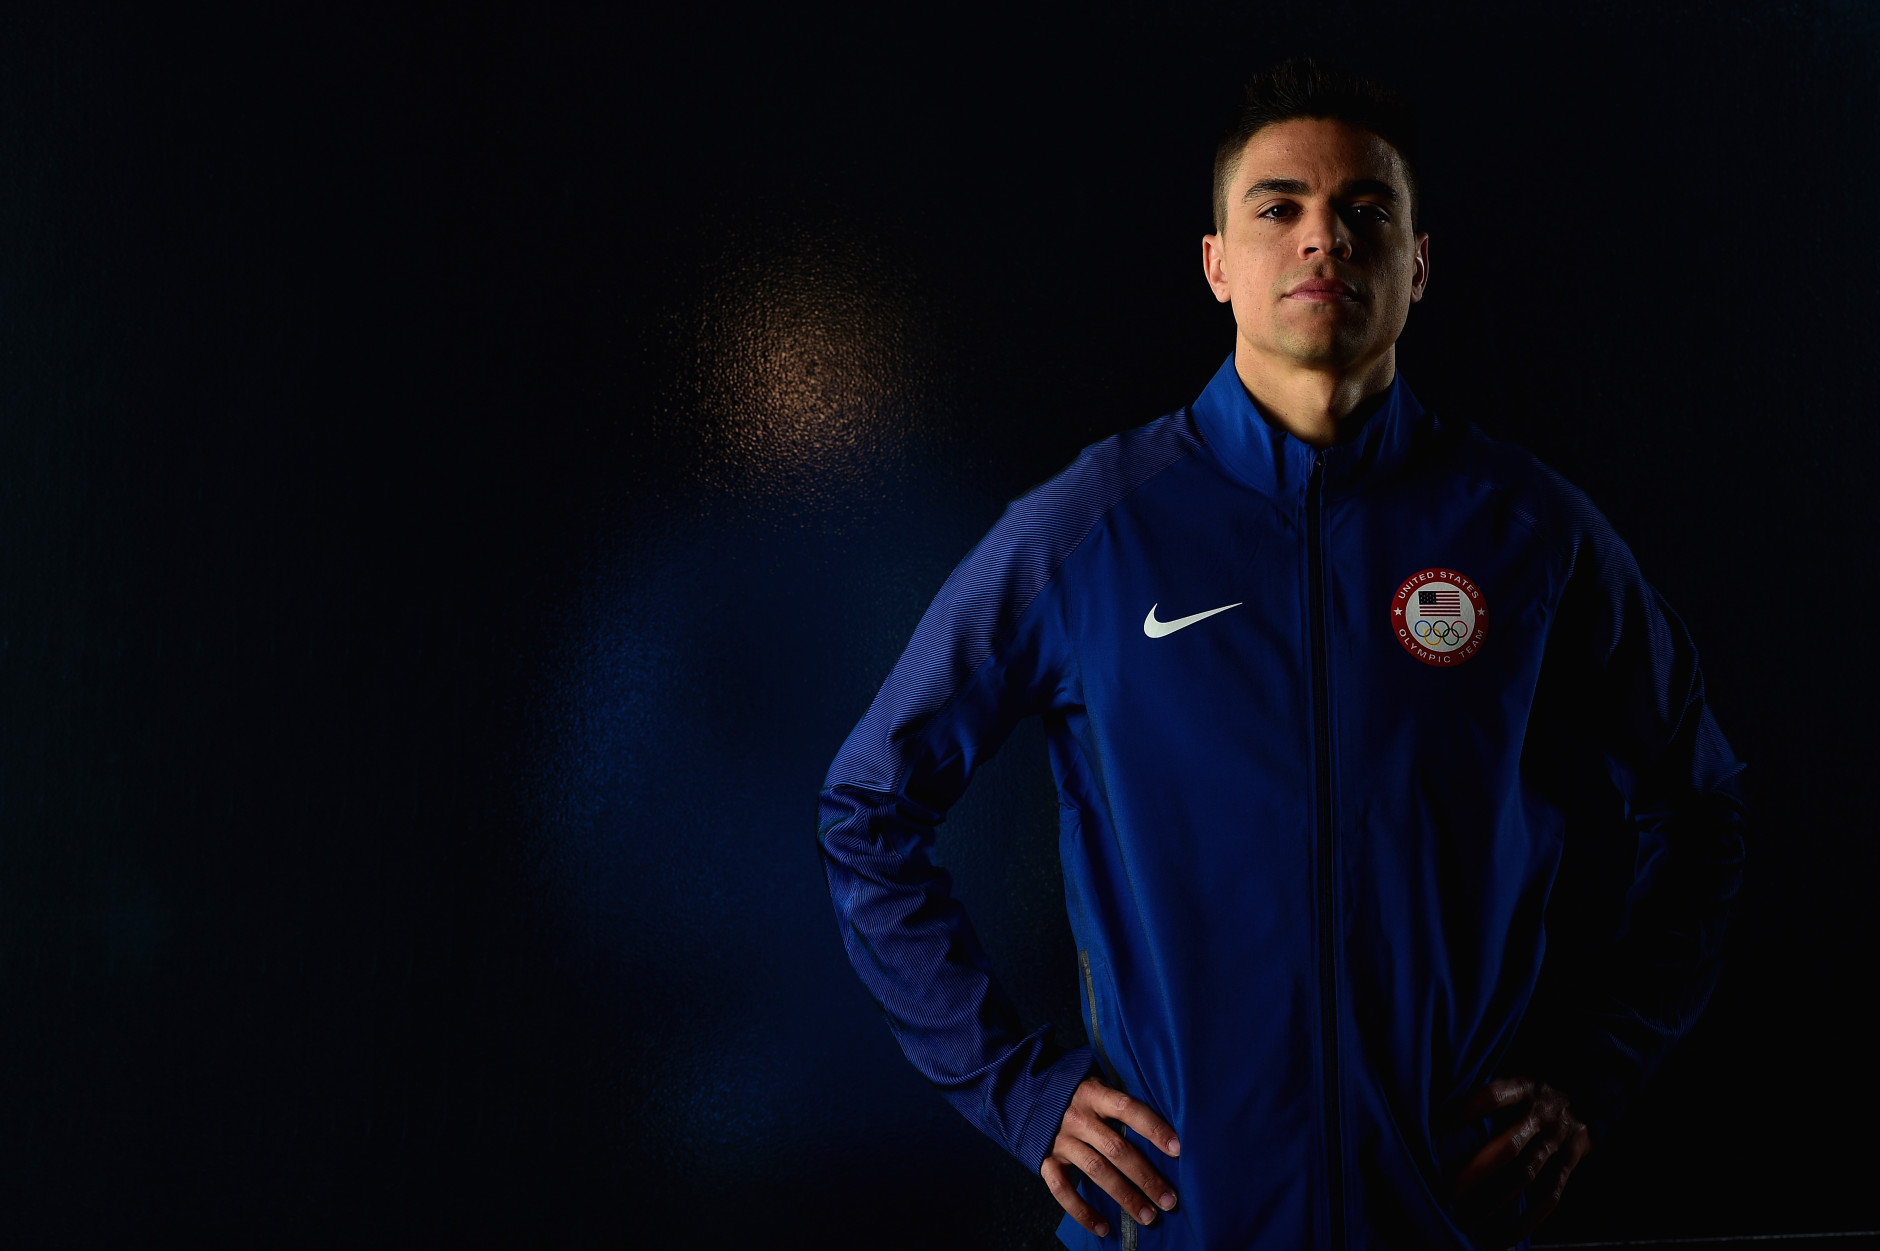 LOS ANGELES, CA - NOVEMBER 18:  Track and field athlete Matt Centrowitz poses for a portrait at the USOC Rio Olympics Shoot at Quixote Studios on November 18, 2015 in Los Angeles, California.  (Photo by Harry How/Getty Images)